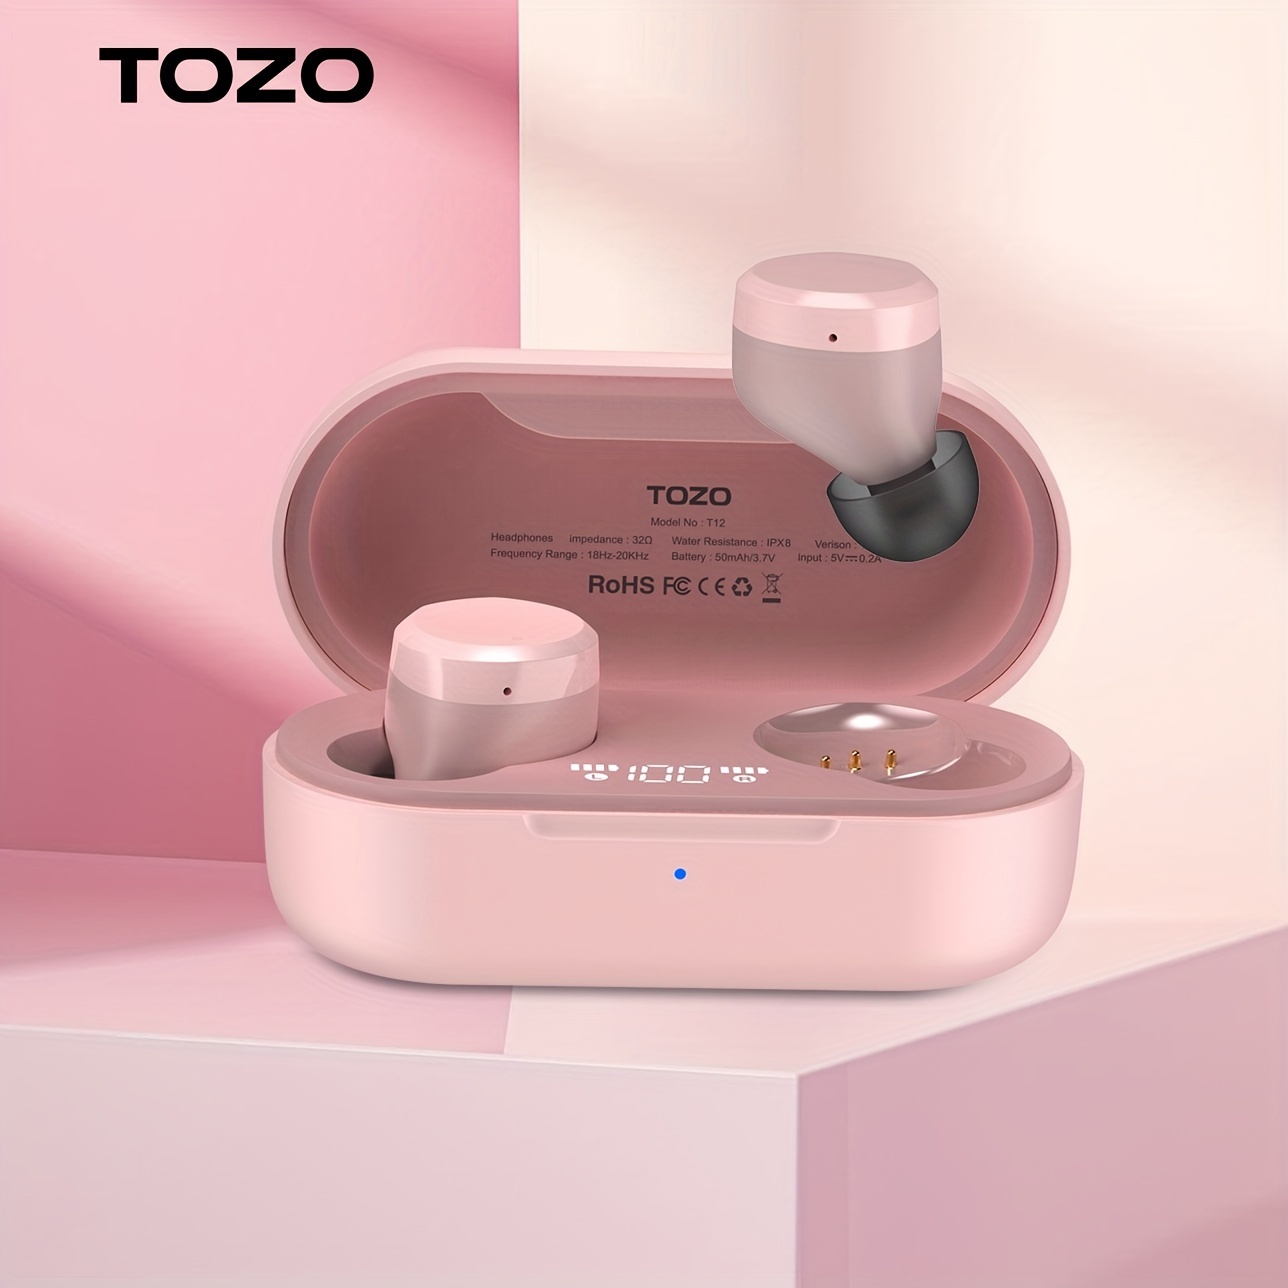  TOZO T12 Wireless Earbuds Bluetooth Headphones Premium Fidelity  Sound Quality Wireless Charging Case Digital LED Intelligence Display IPX8  Waterproof Earphones Built-in Mic Headset for Sport Blue : Electronics